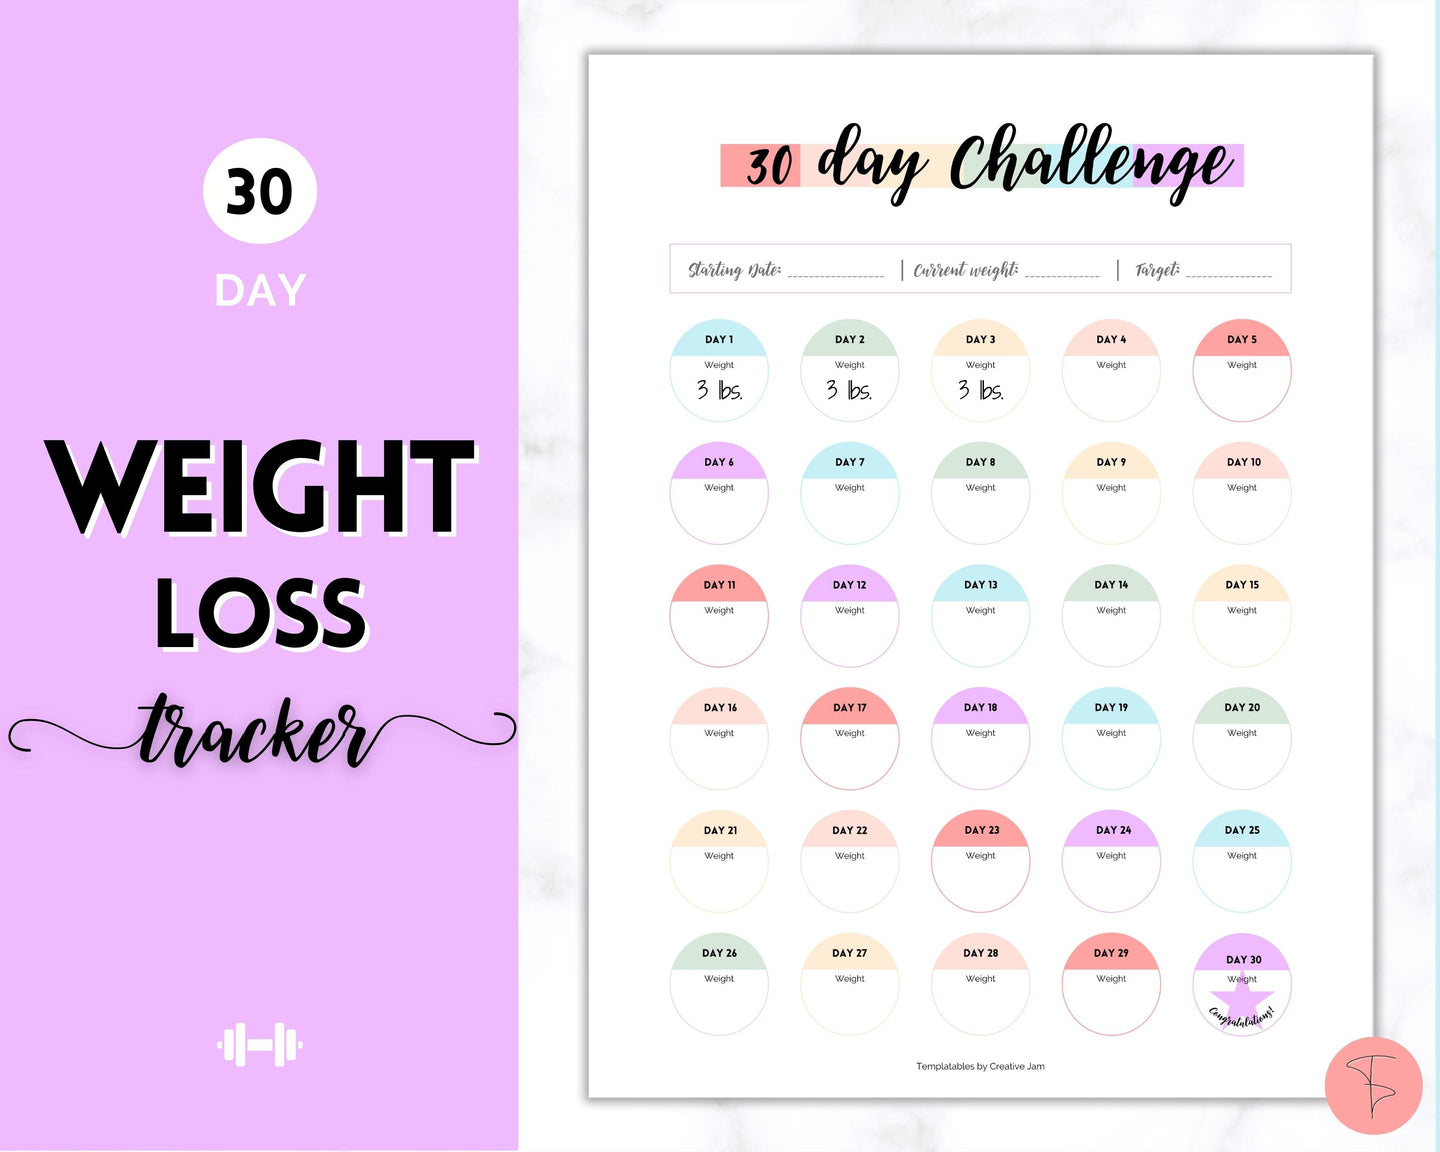 30 day Weight Loss Tracker & Monthly Challenge | Weight Loss Chart, Pounds Lost Fitness Tracker | Rainbow Swash